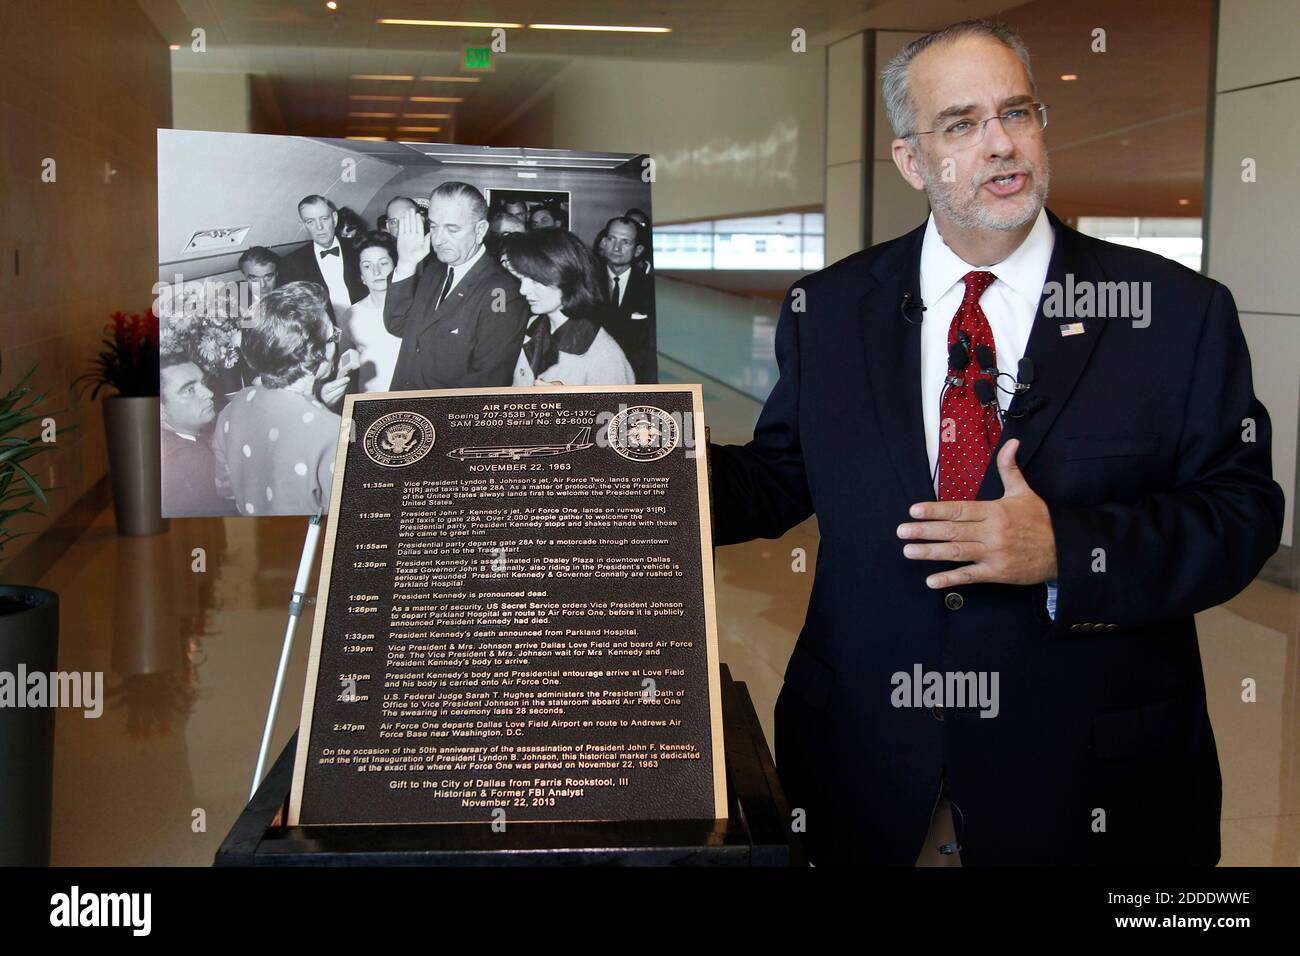 NO FILM, NO VIDEO, NO TV, NO DOCUMENTARY - Farris Rookstool III, a former FBI agent and Kennedy assassination historian, holds a press conference to show a plaque he donated, Thursday, Sept. 3, 2015, marking the spot at Love Field where Lyndon Baines Johnson was sworn in as president following the assassination of John F. Kennedy in Dallas, Texas. The plaque will be installed on the ramp where the plane was parked and will not be accessible to the public. (Rodger Mallison/Fort Worth Star-Telegram/TNS/ABACAPRESS.COM Stock Photo